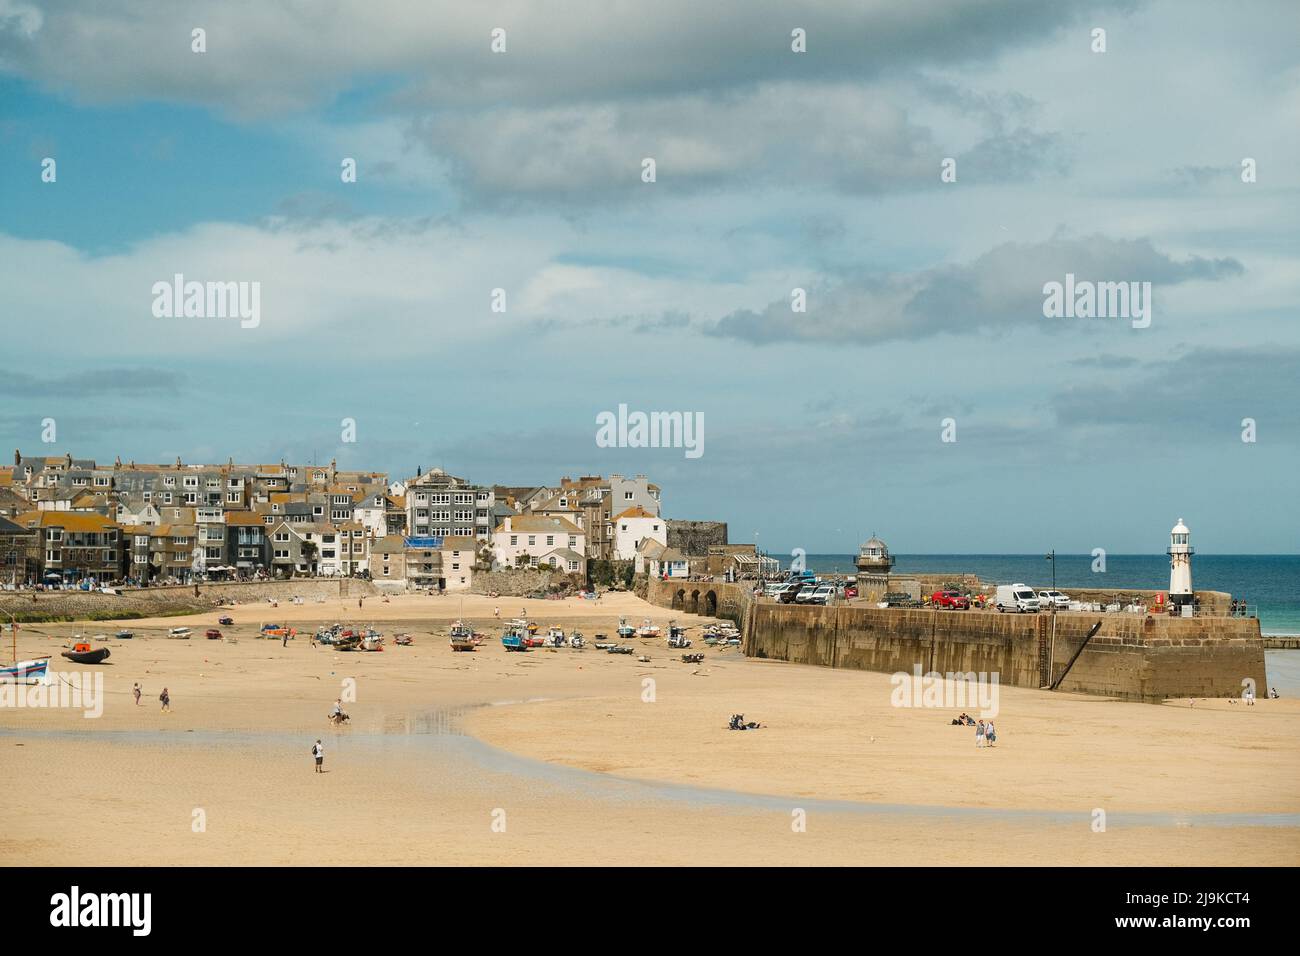 St Ives, Cornwall, UK. St Ives Harbour beach at low tide.. Stock Photo